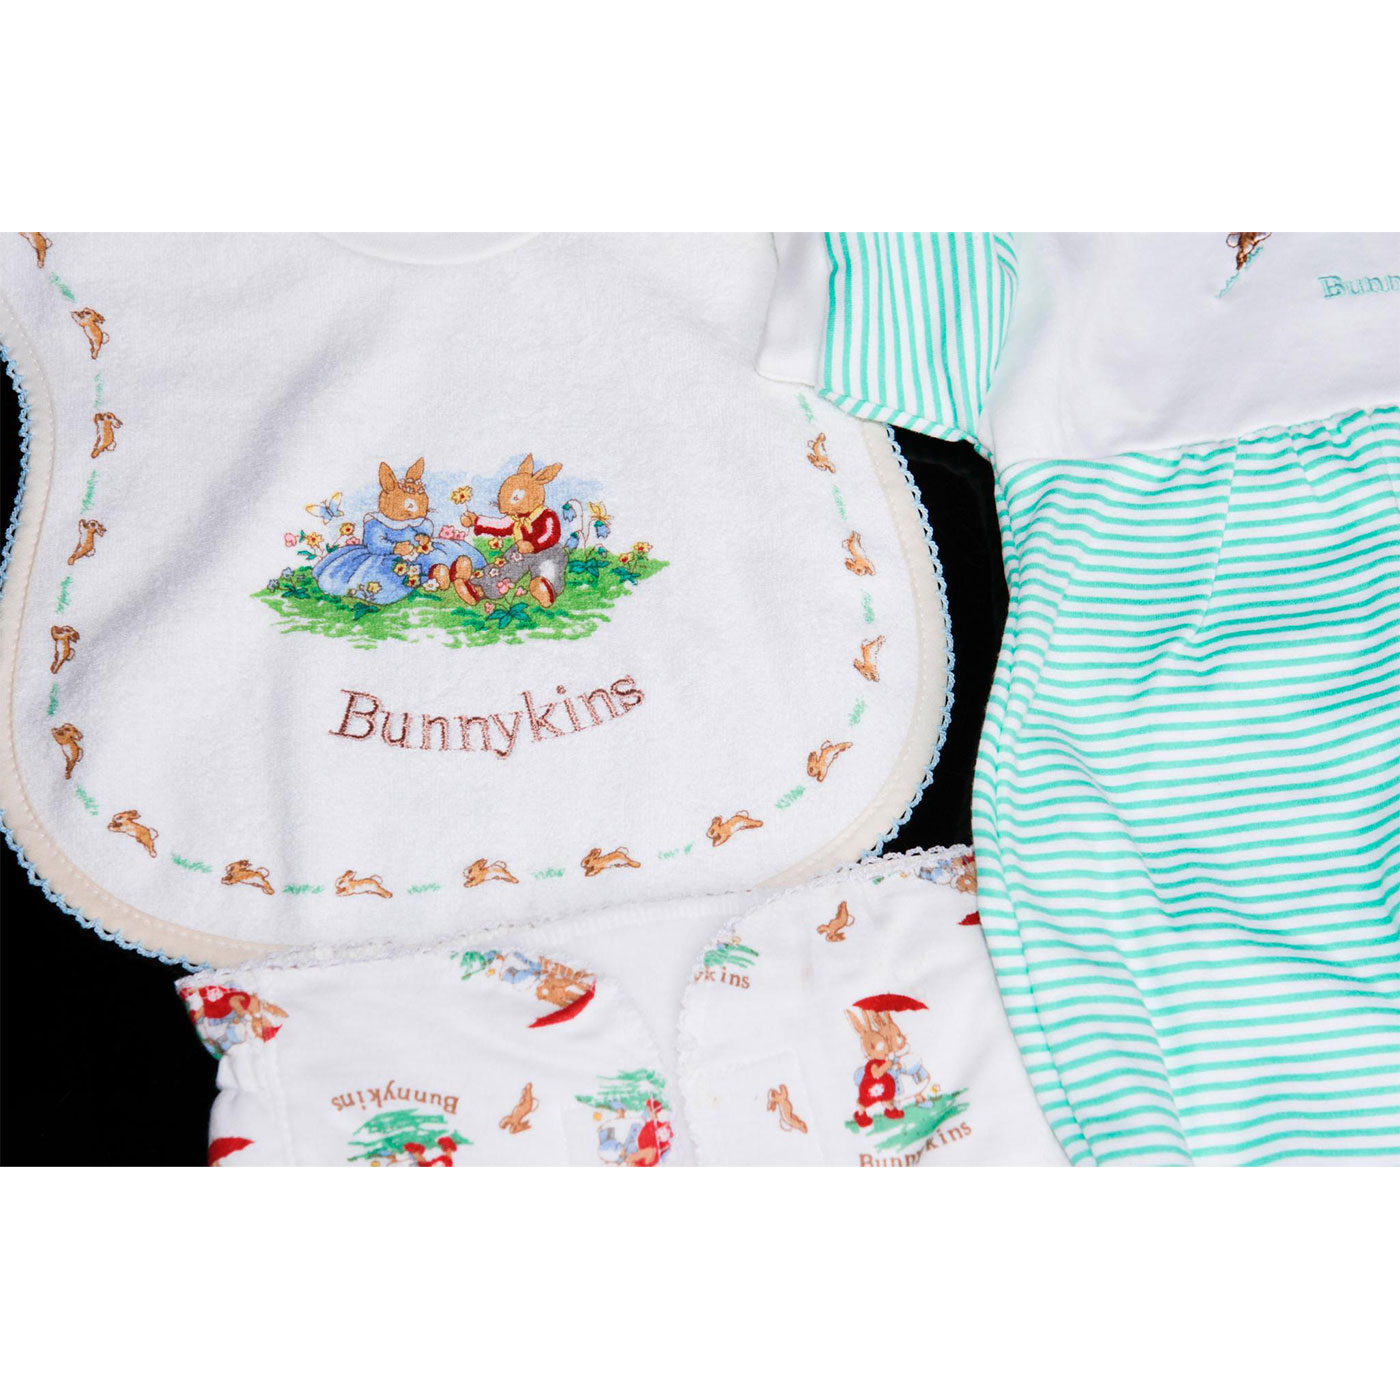 ROYAL DOULTON BUNNYKINS BABY CLOTHING AND ACCESSORIES - Image 8 of 8